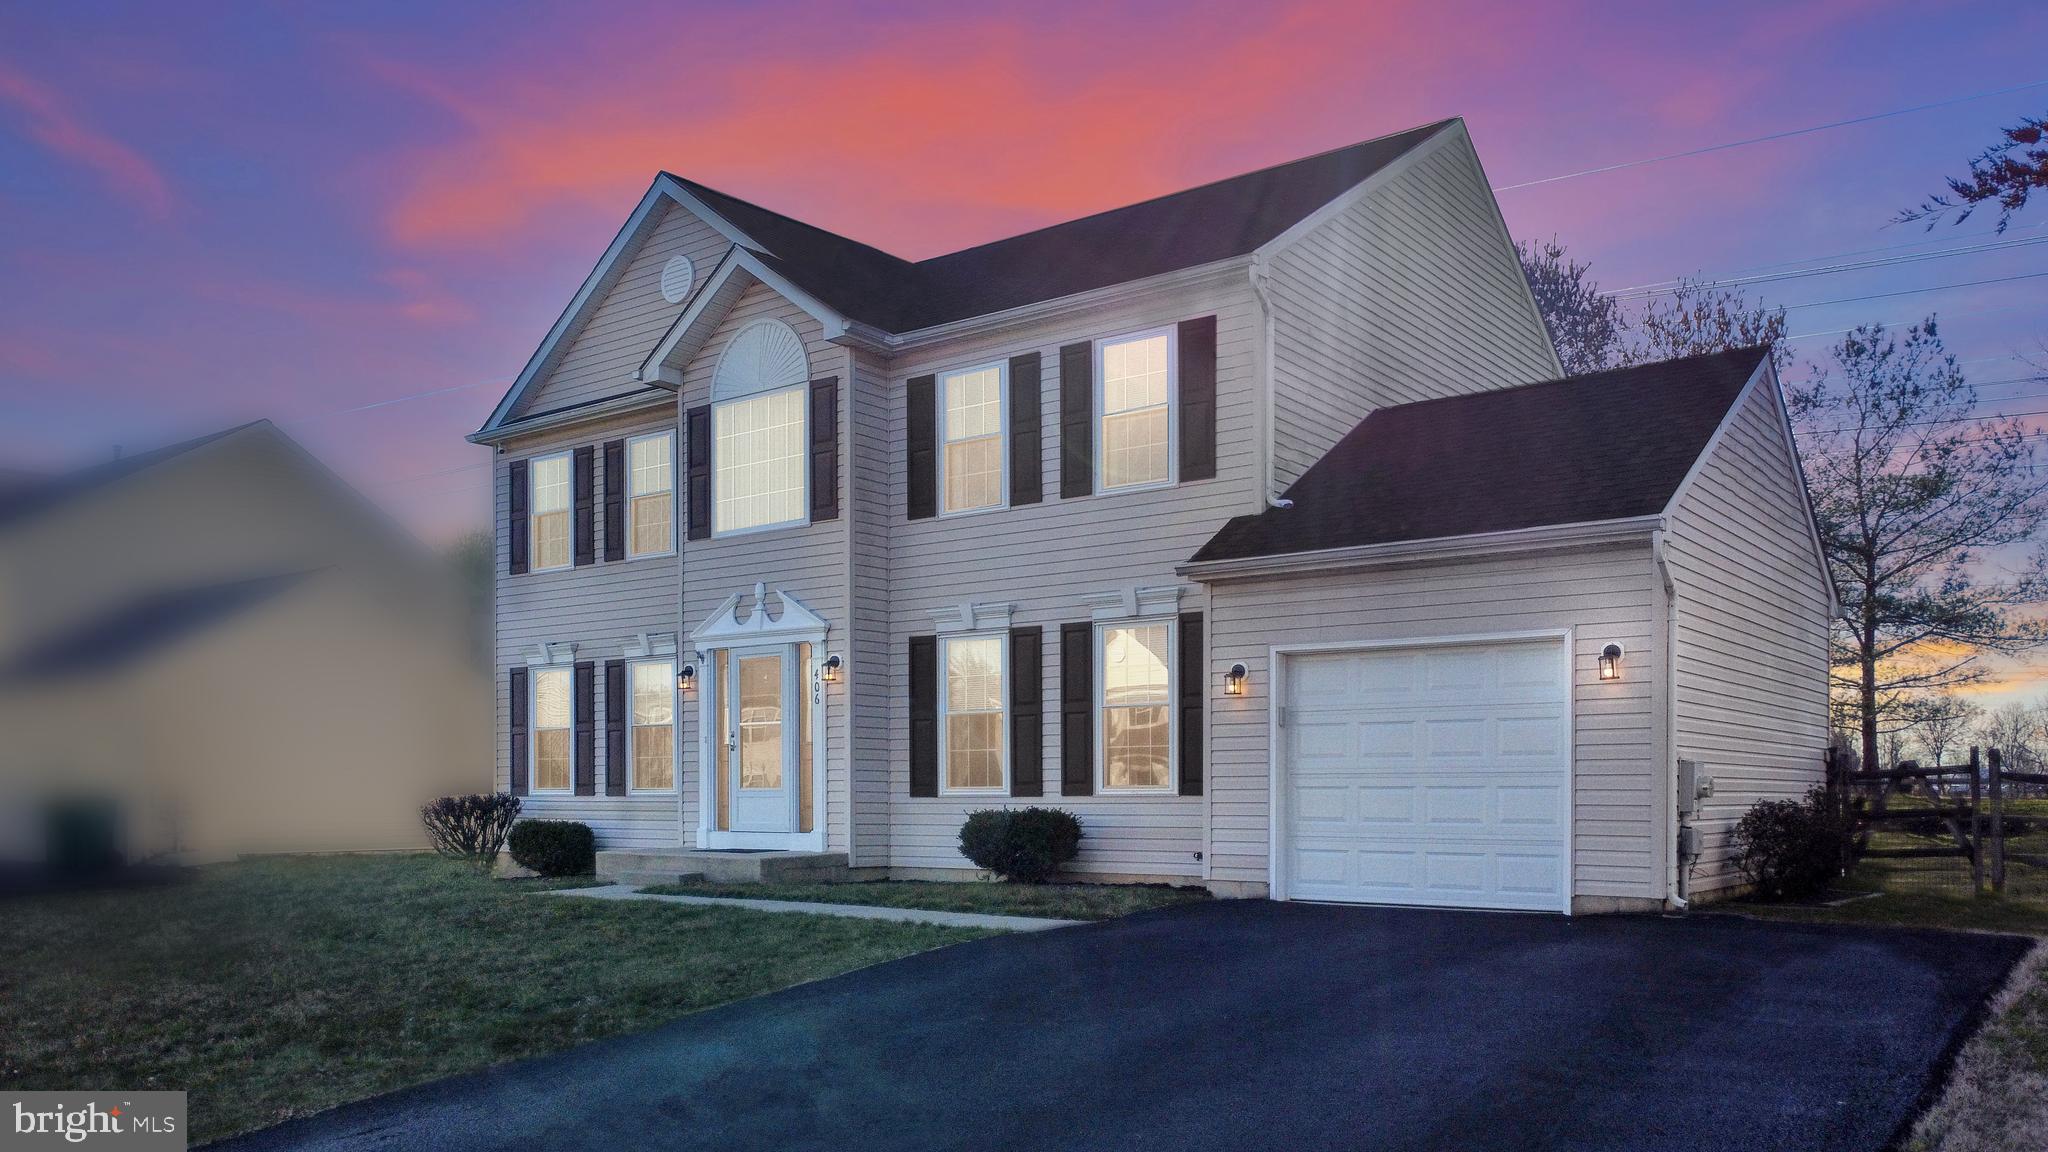 Pride of ownership abounds in this immaculate East facing 4 bed 2 1/2 bath colonial in desirable Bar